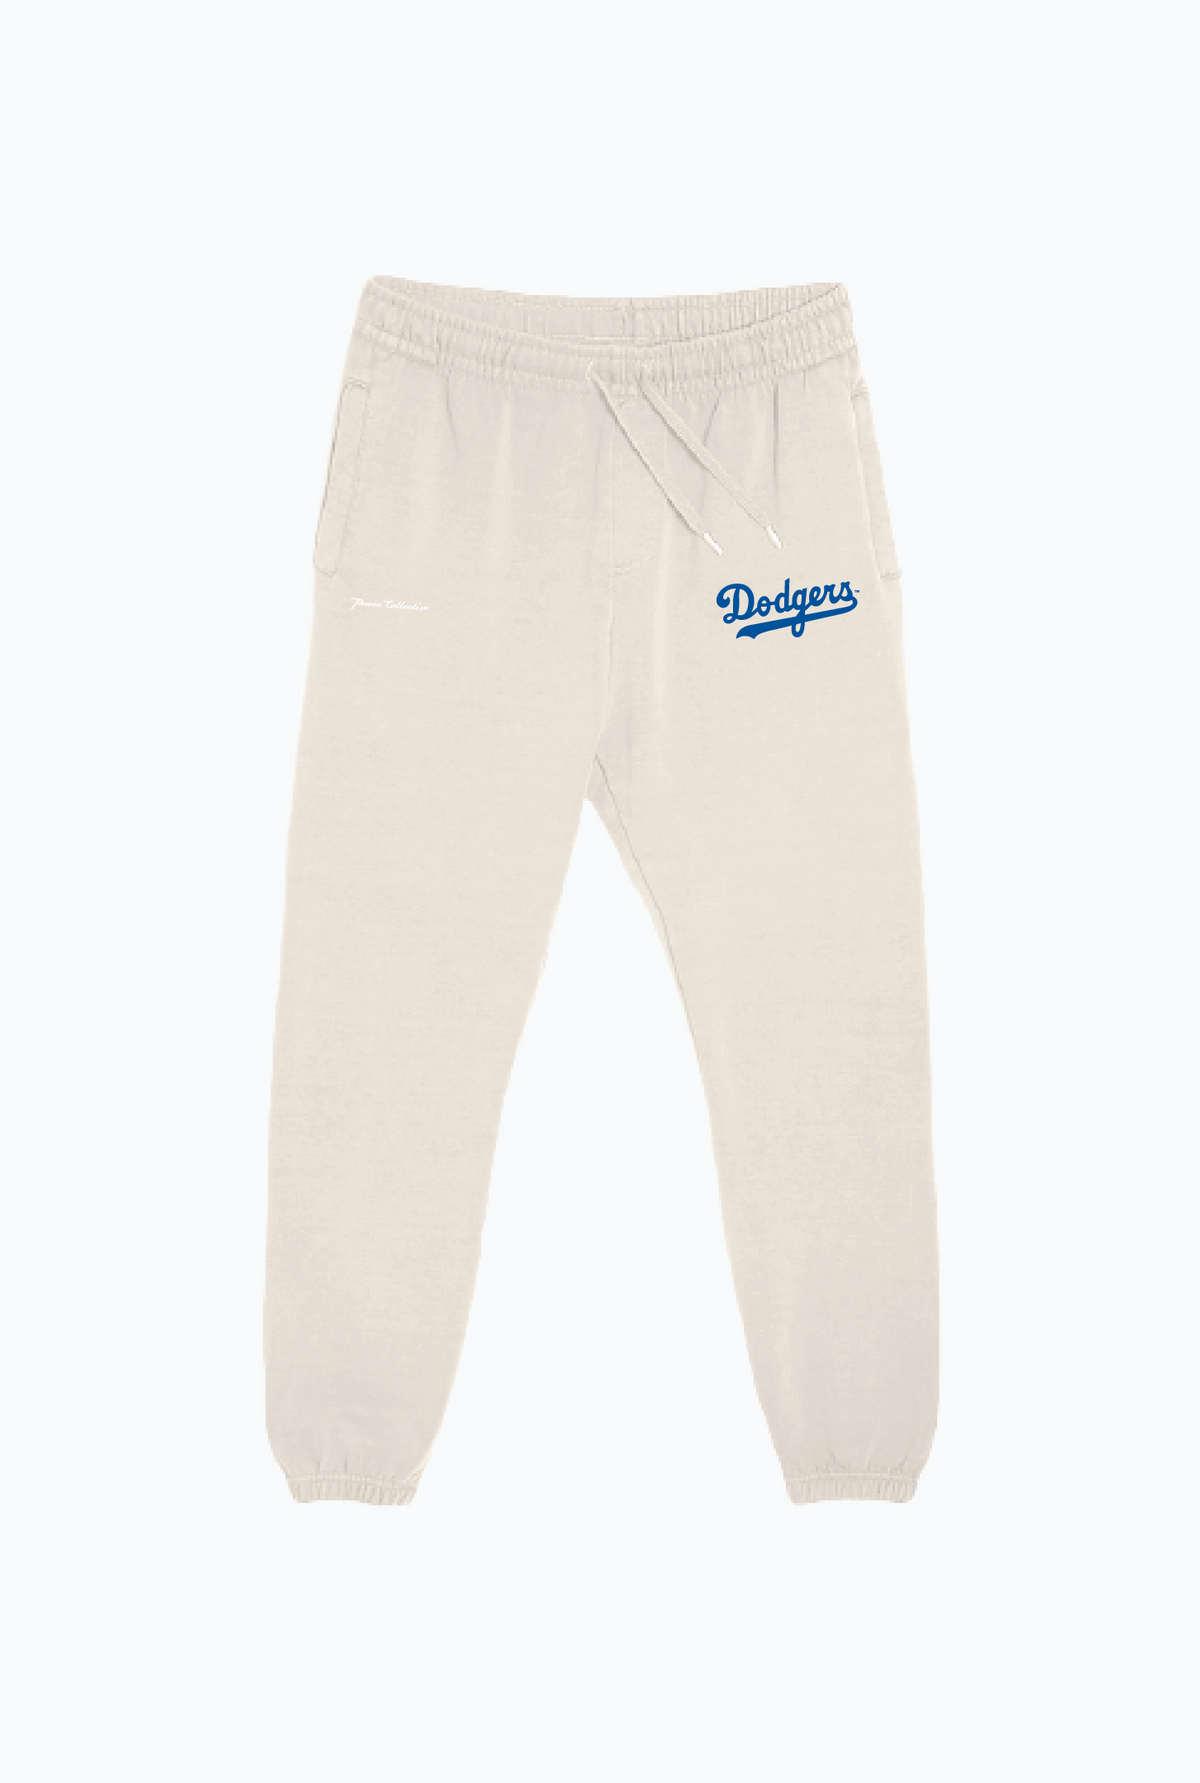 Los Angeles Dodgers Heavyweight Jogger - Ivory